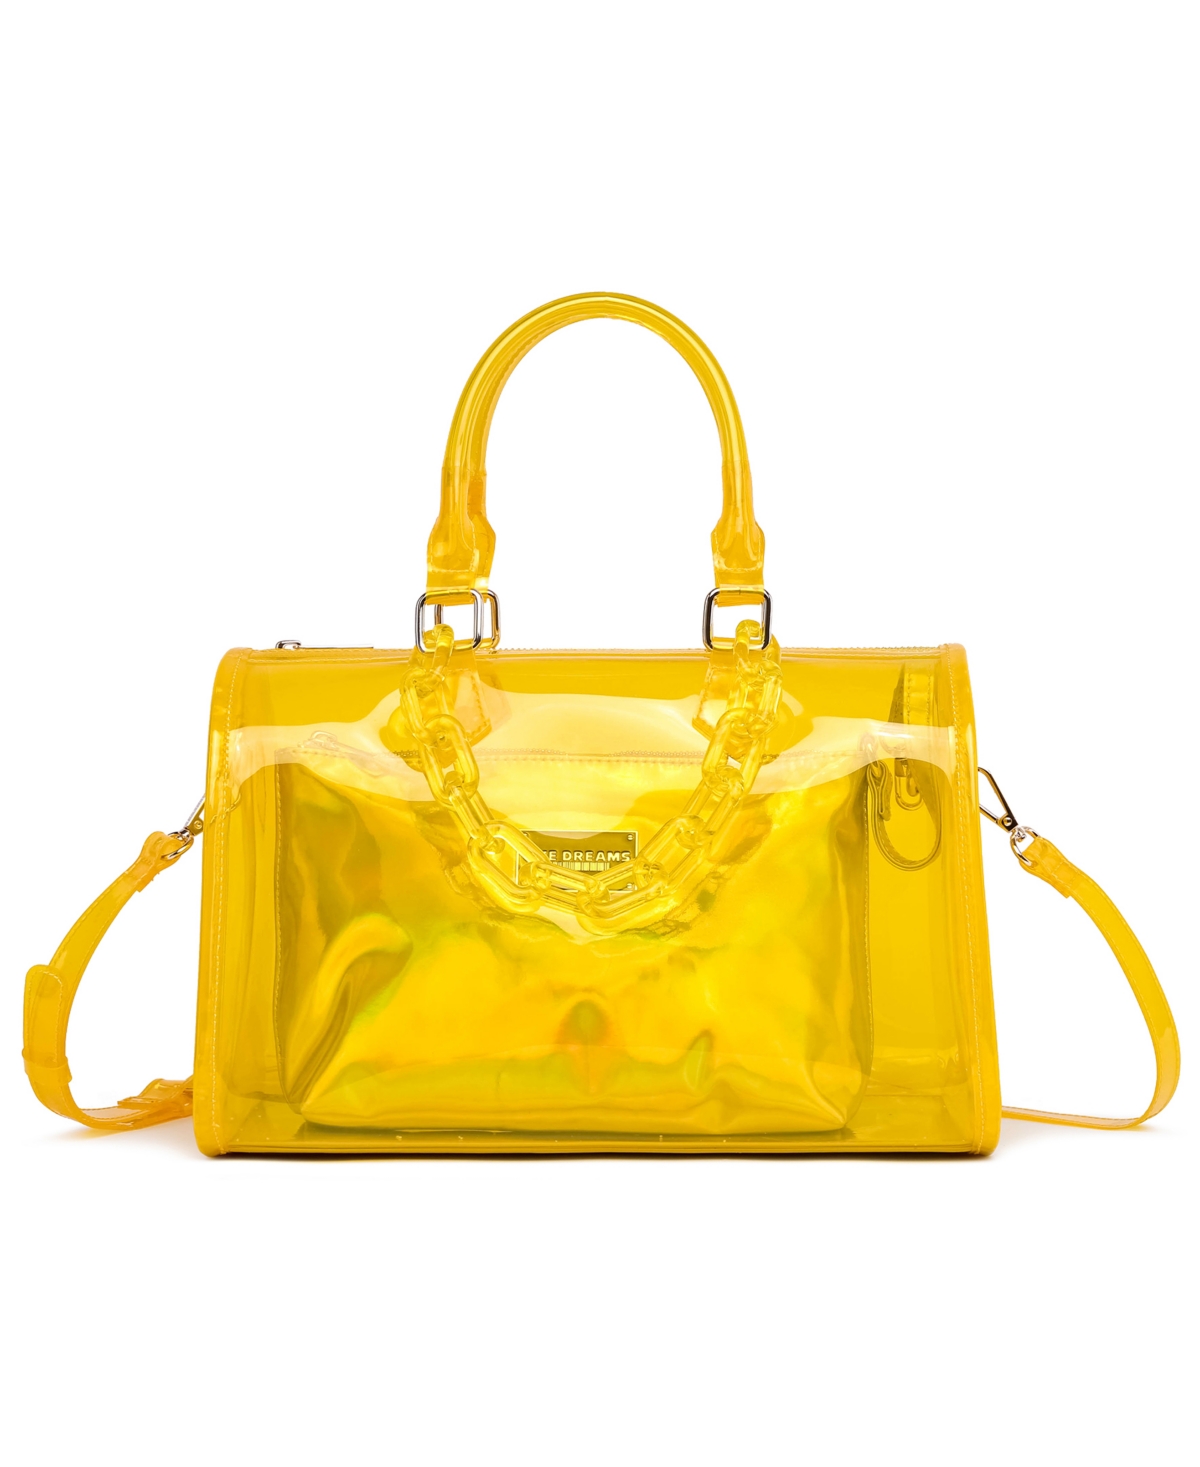 Iced Out Hologram Satchel - Yellow